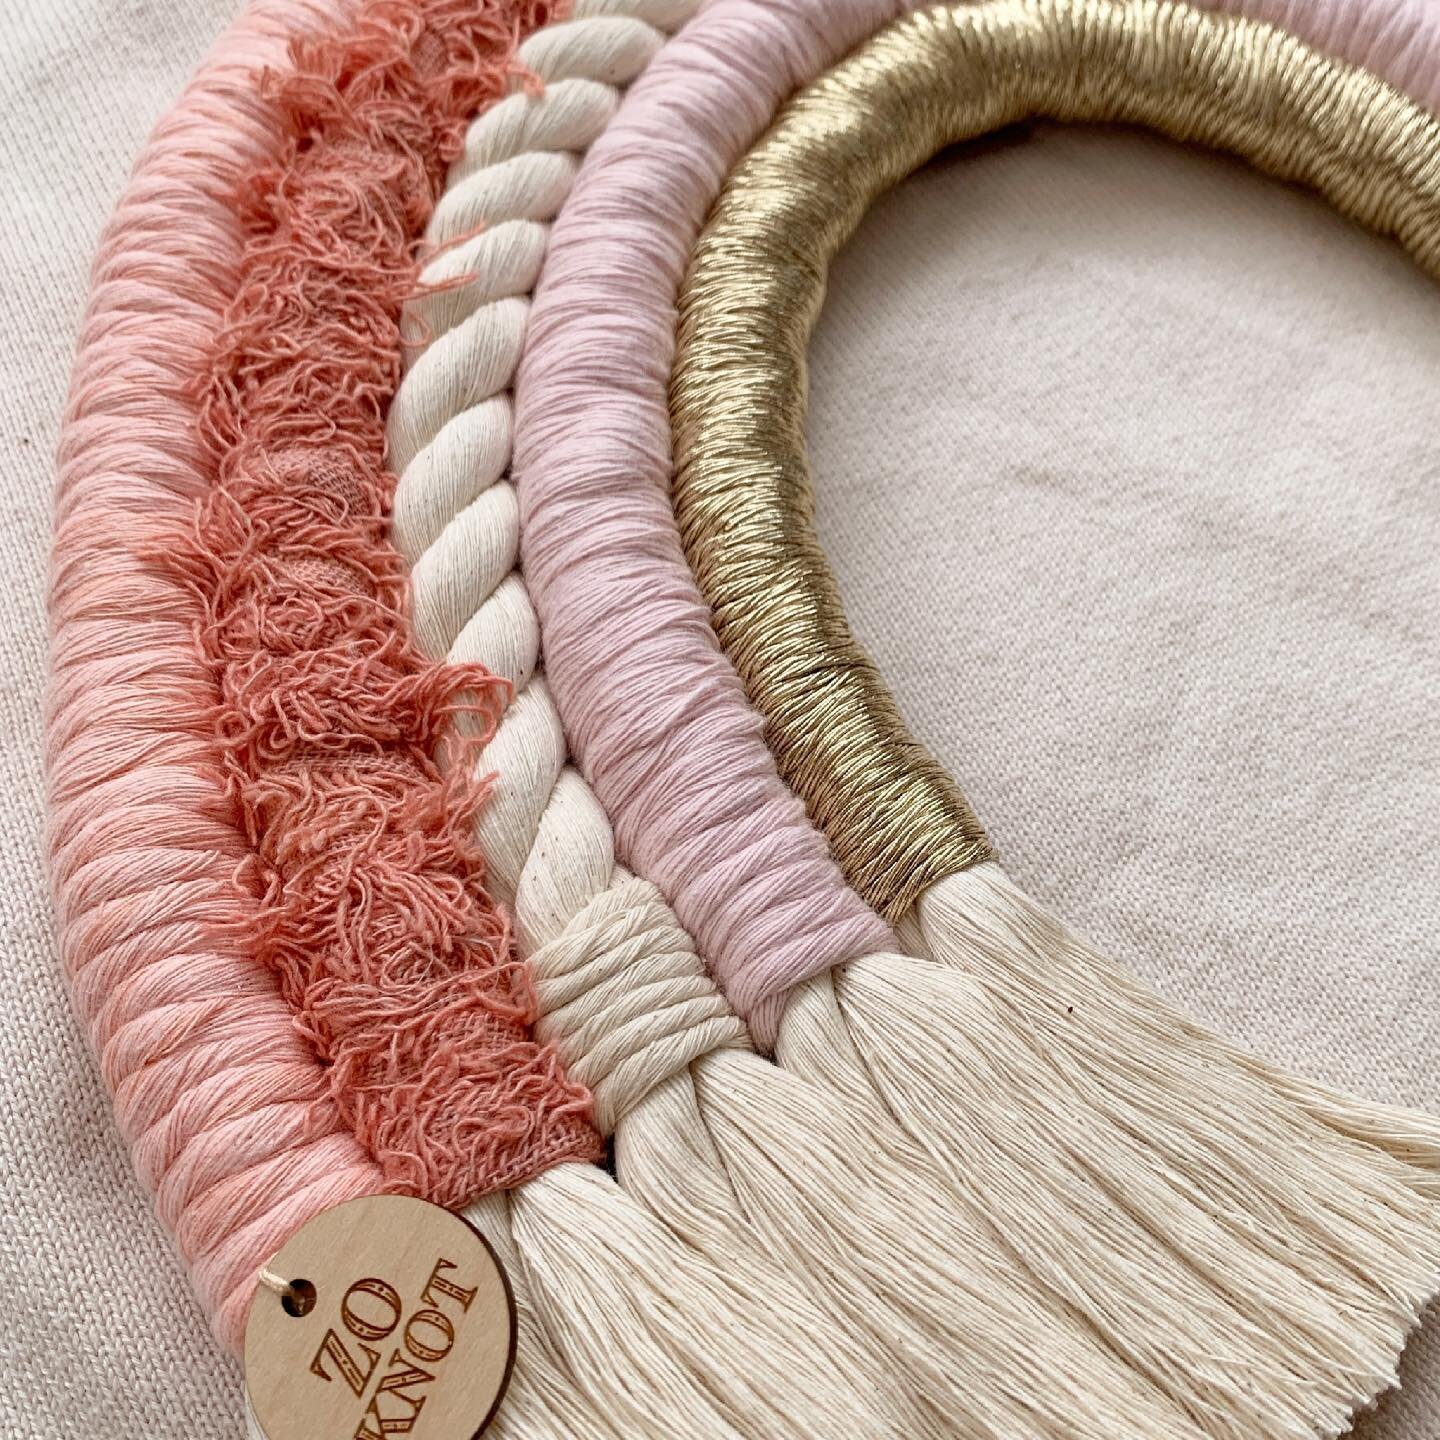 🌸SAKURA DELUXE RAINBOW🌸
.
Now available to order online! 
.
Inspired by the gentle cherry blossoms from my travels to Japan - this super sweet rainbow has all the texture &amp; detail!
.
@zo.knot  #zoknot #macrame #macramerainbow #macramerainbows #